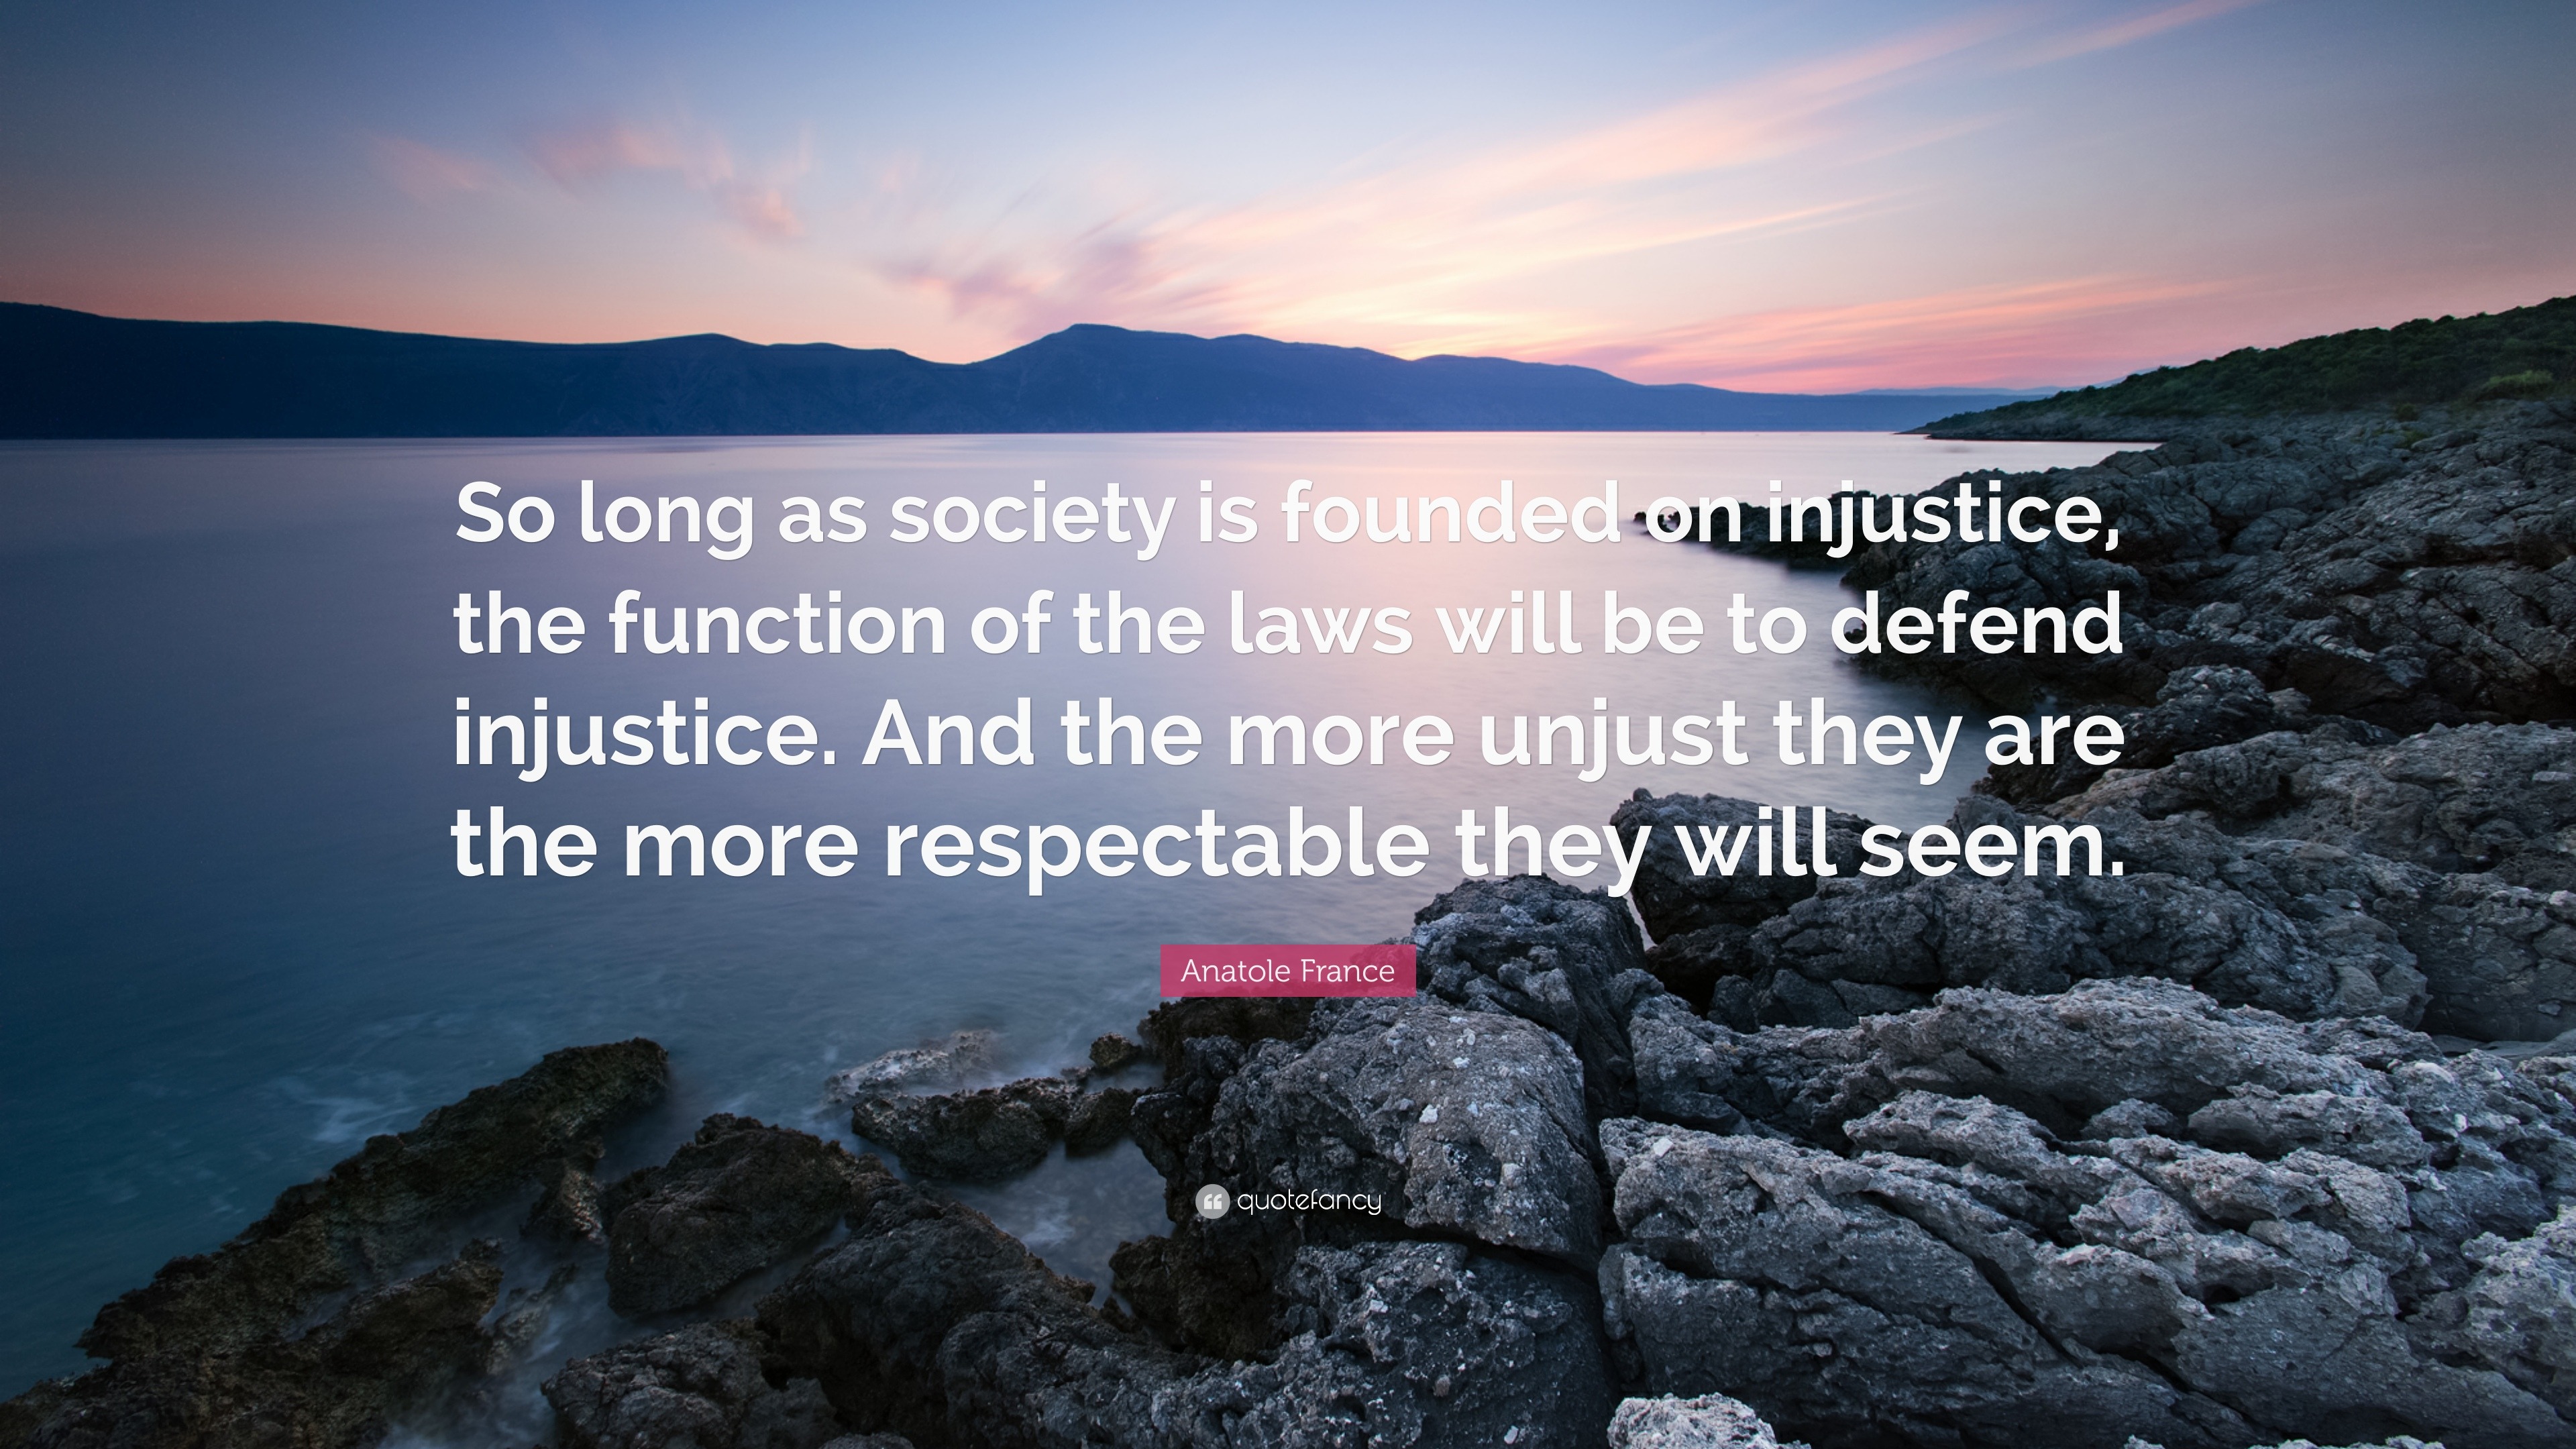 Anatole France Quote: “So long as society is founded on injustice